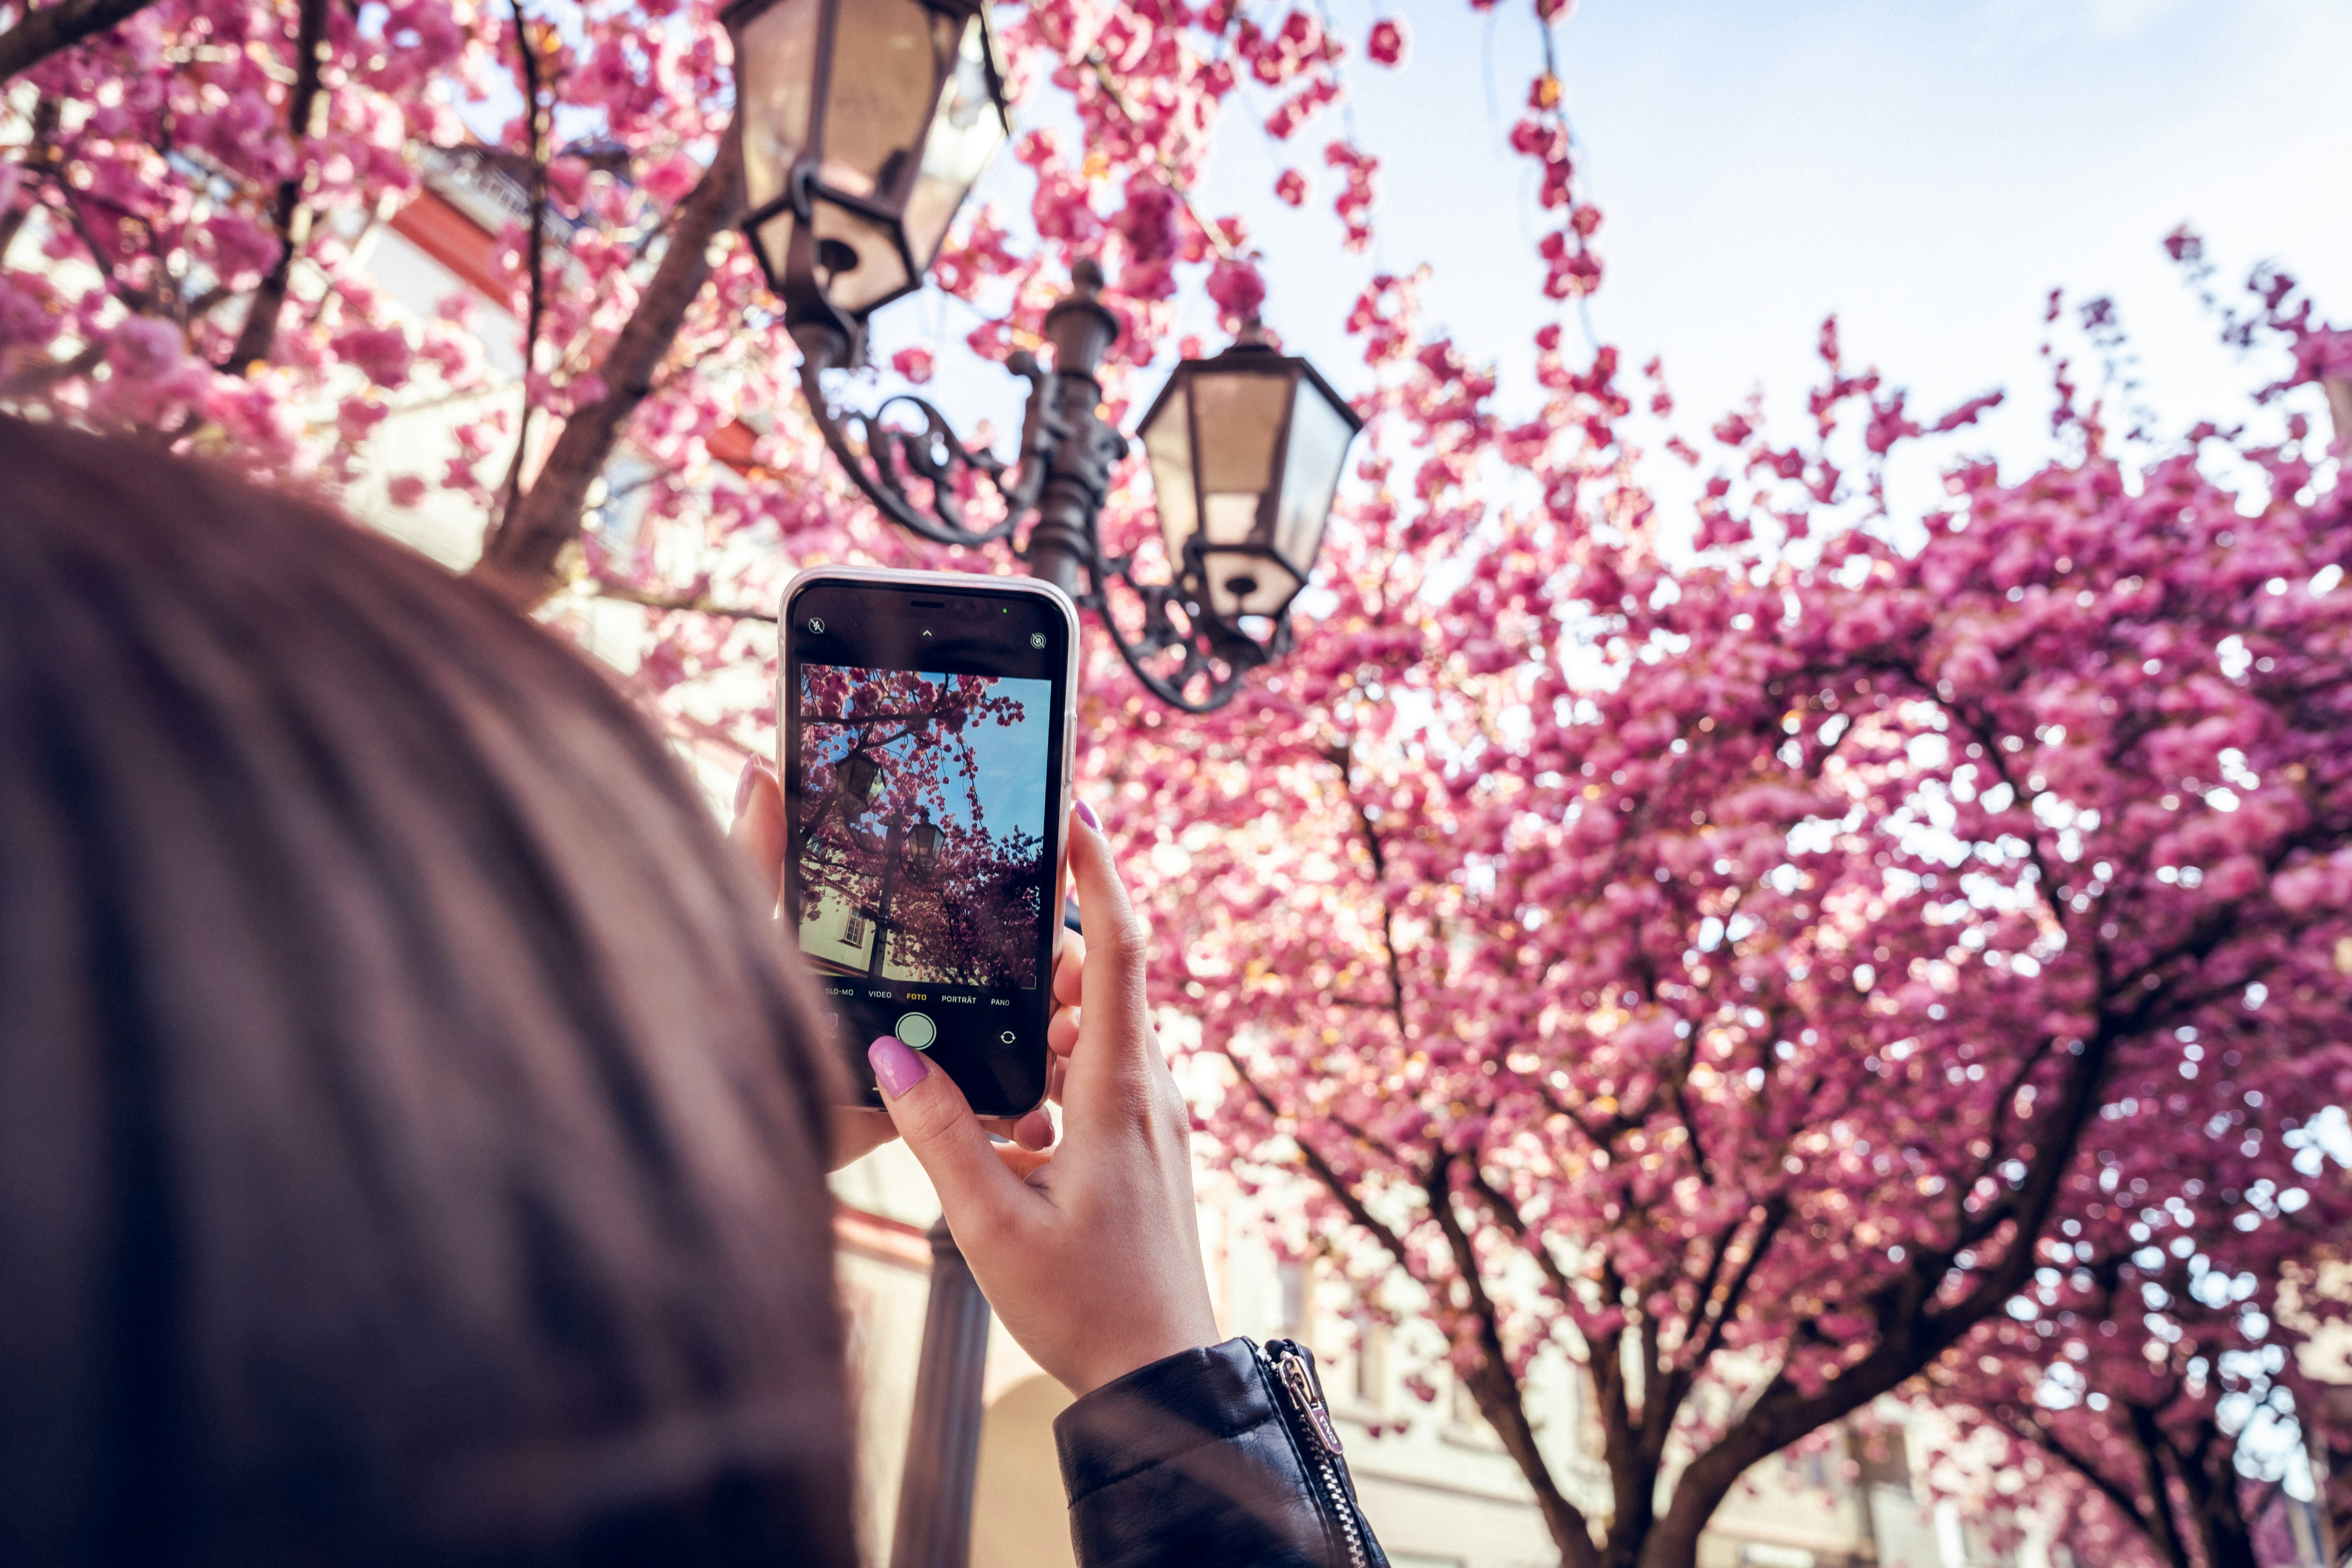 A woman takes a picture of a cherry blossom tree with her iPhone.